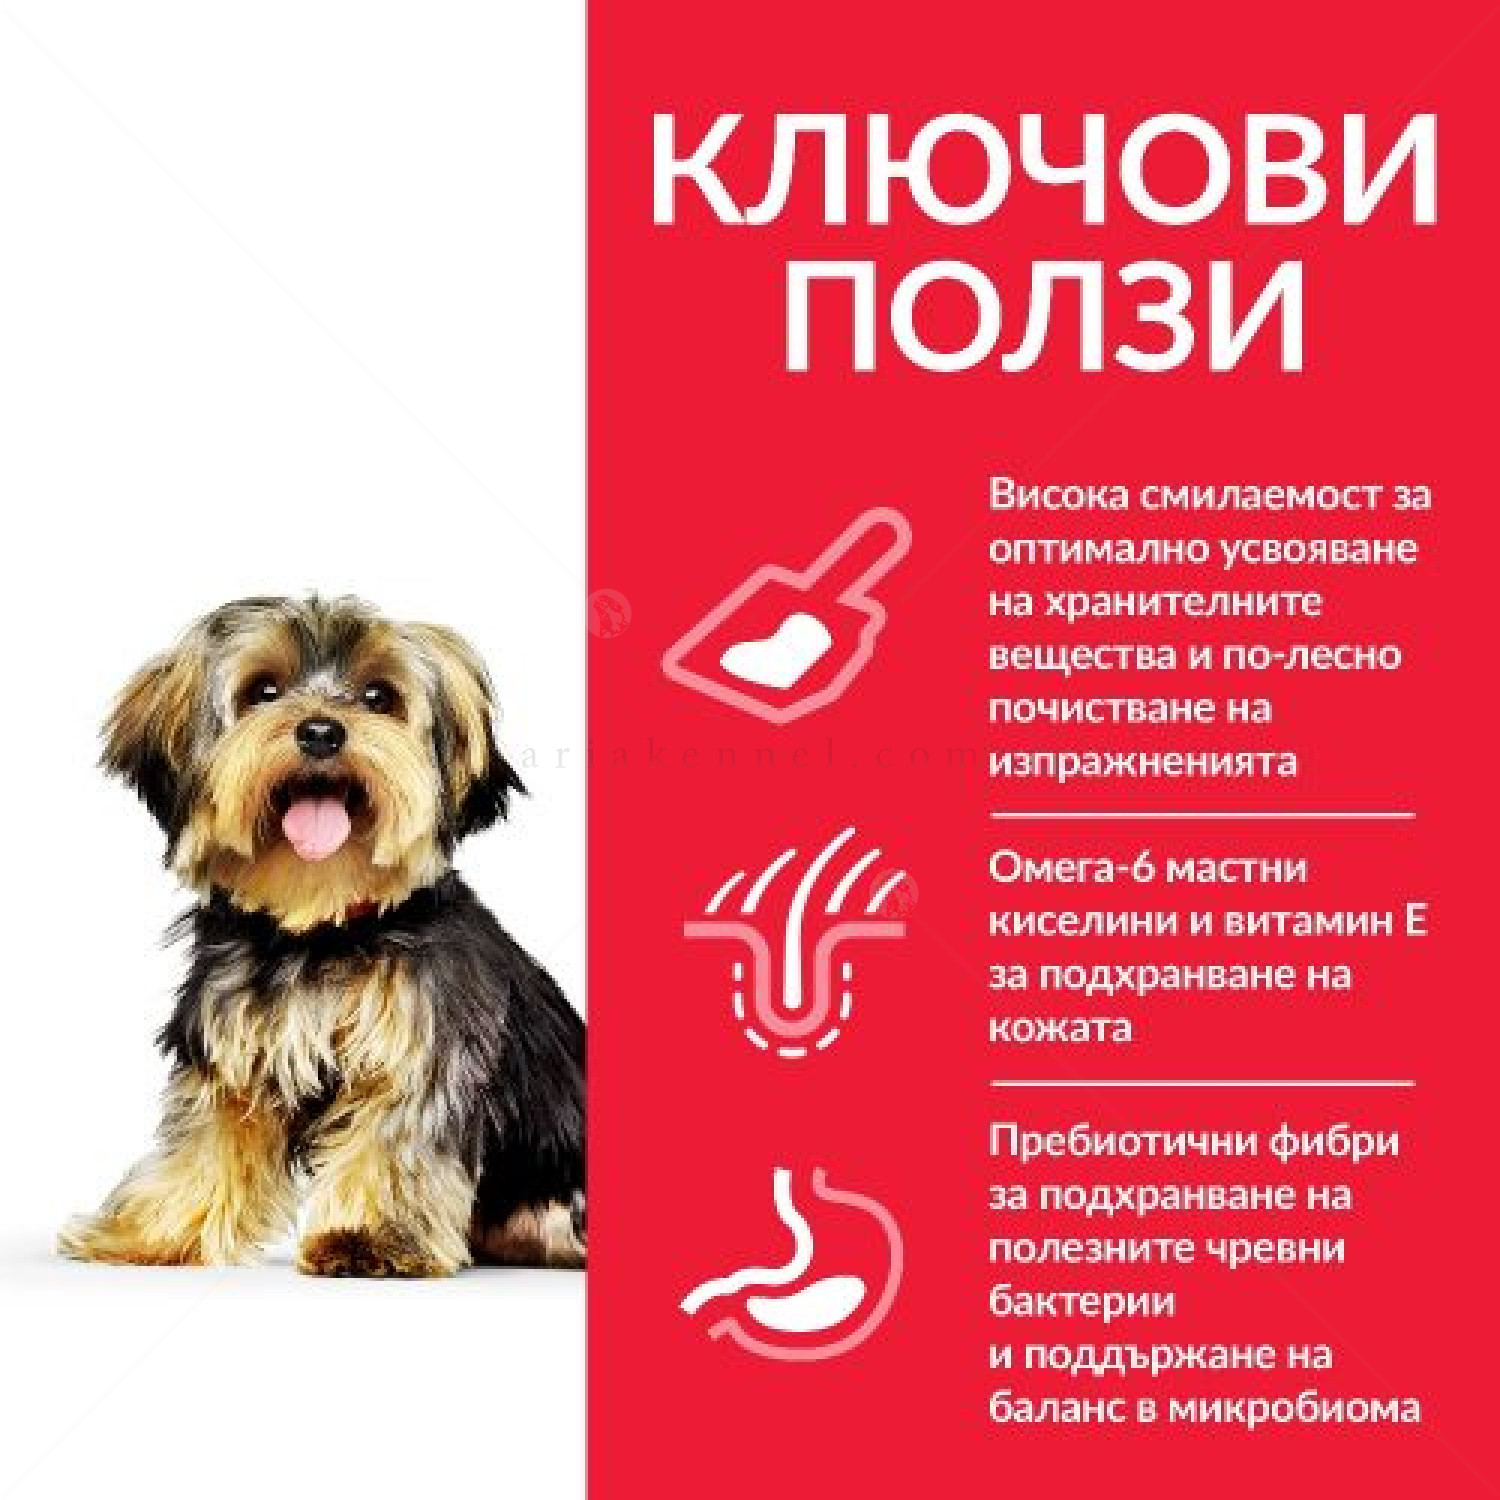 HILL’S SP 1.500 кг Adult Small&Mini Sensitive Stomach&Skin Chicken